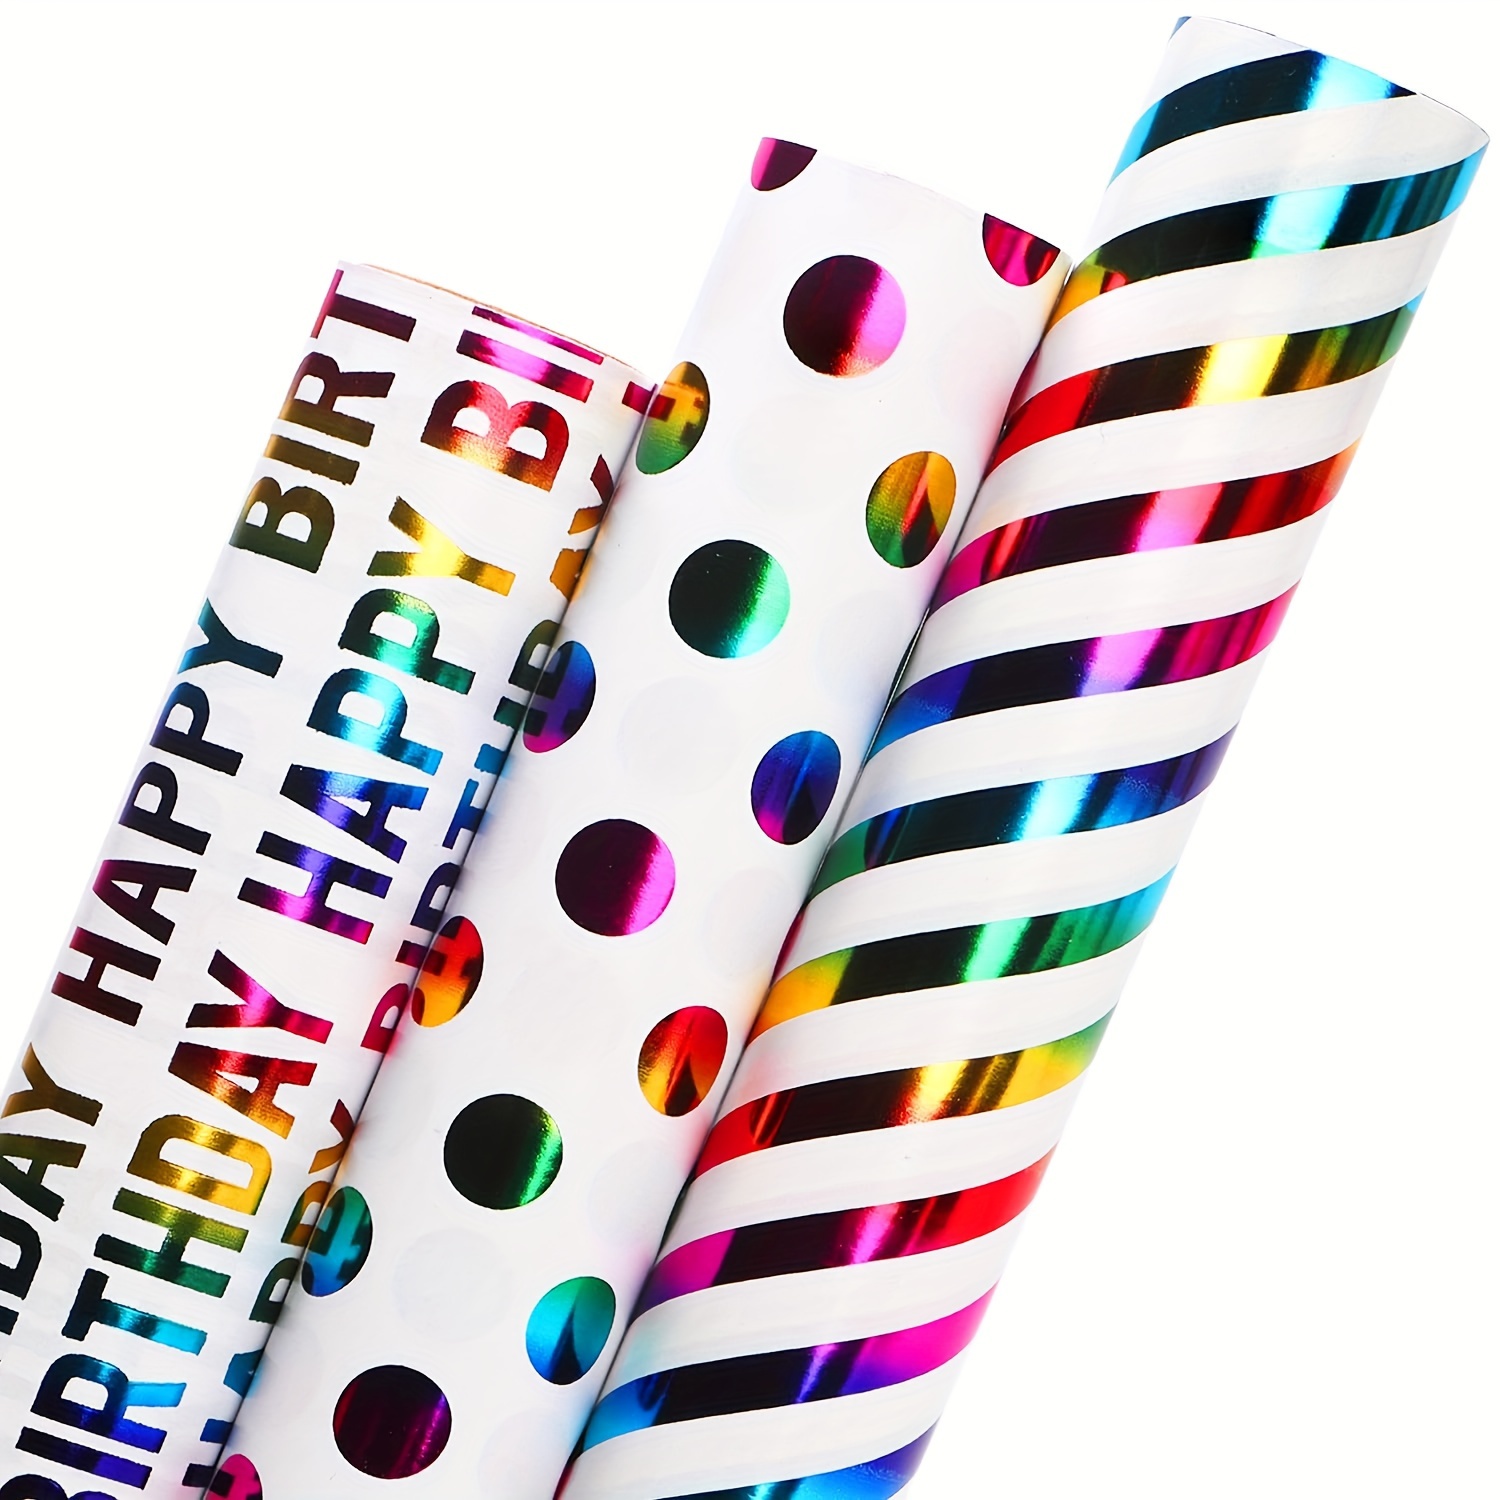 

Happy Birthday Gift Wrapping Paper Set - 3 Rolls Of Colorful Polka Dot And Striped Birthday Wrapping Paper, Paper Material, Perfect For Birthday Presents - 27.5" X 19.7" Each Roll.